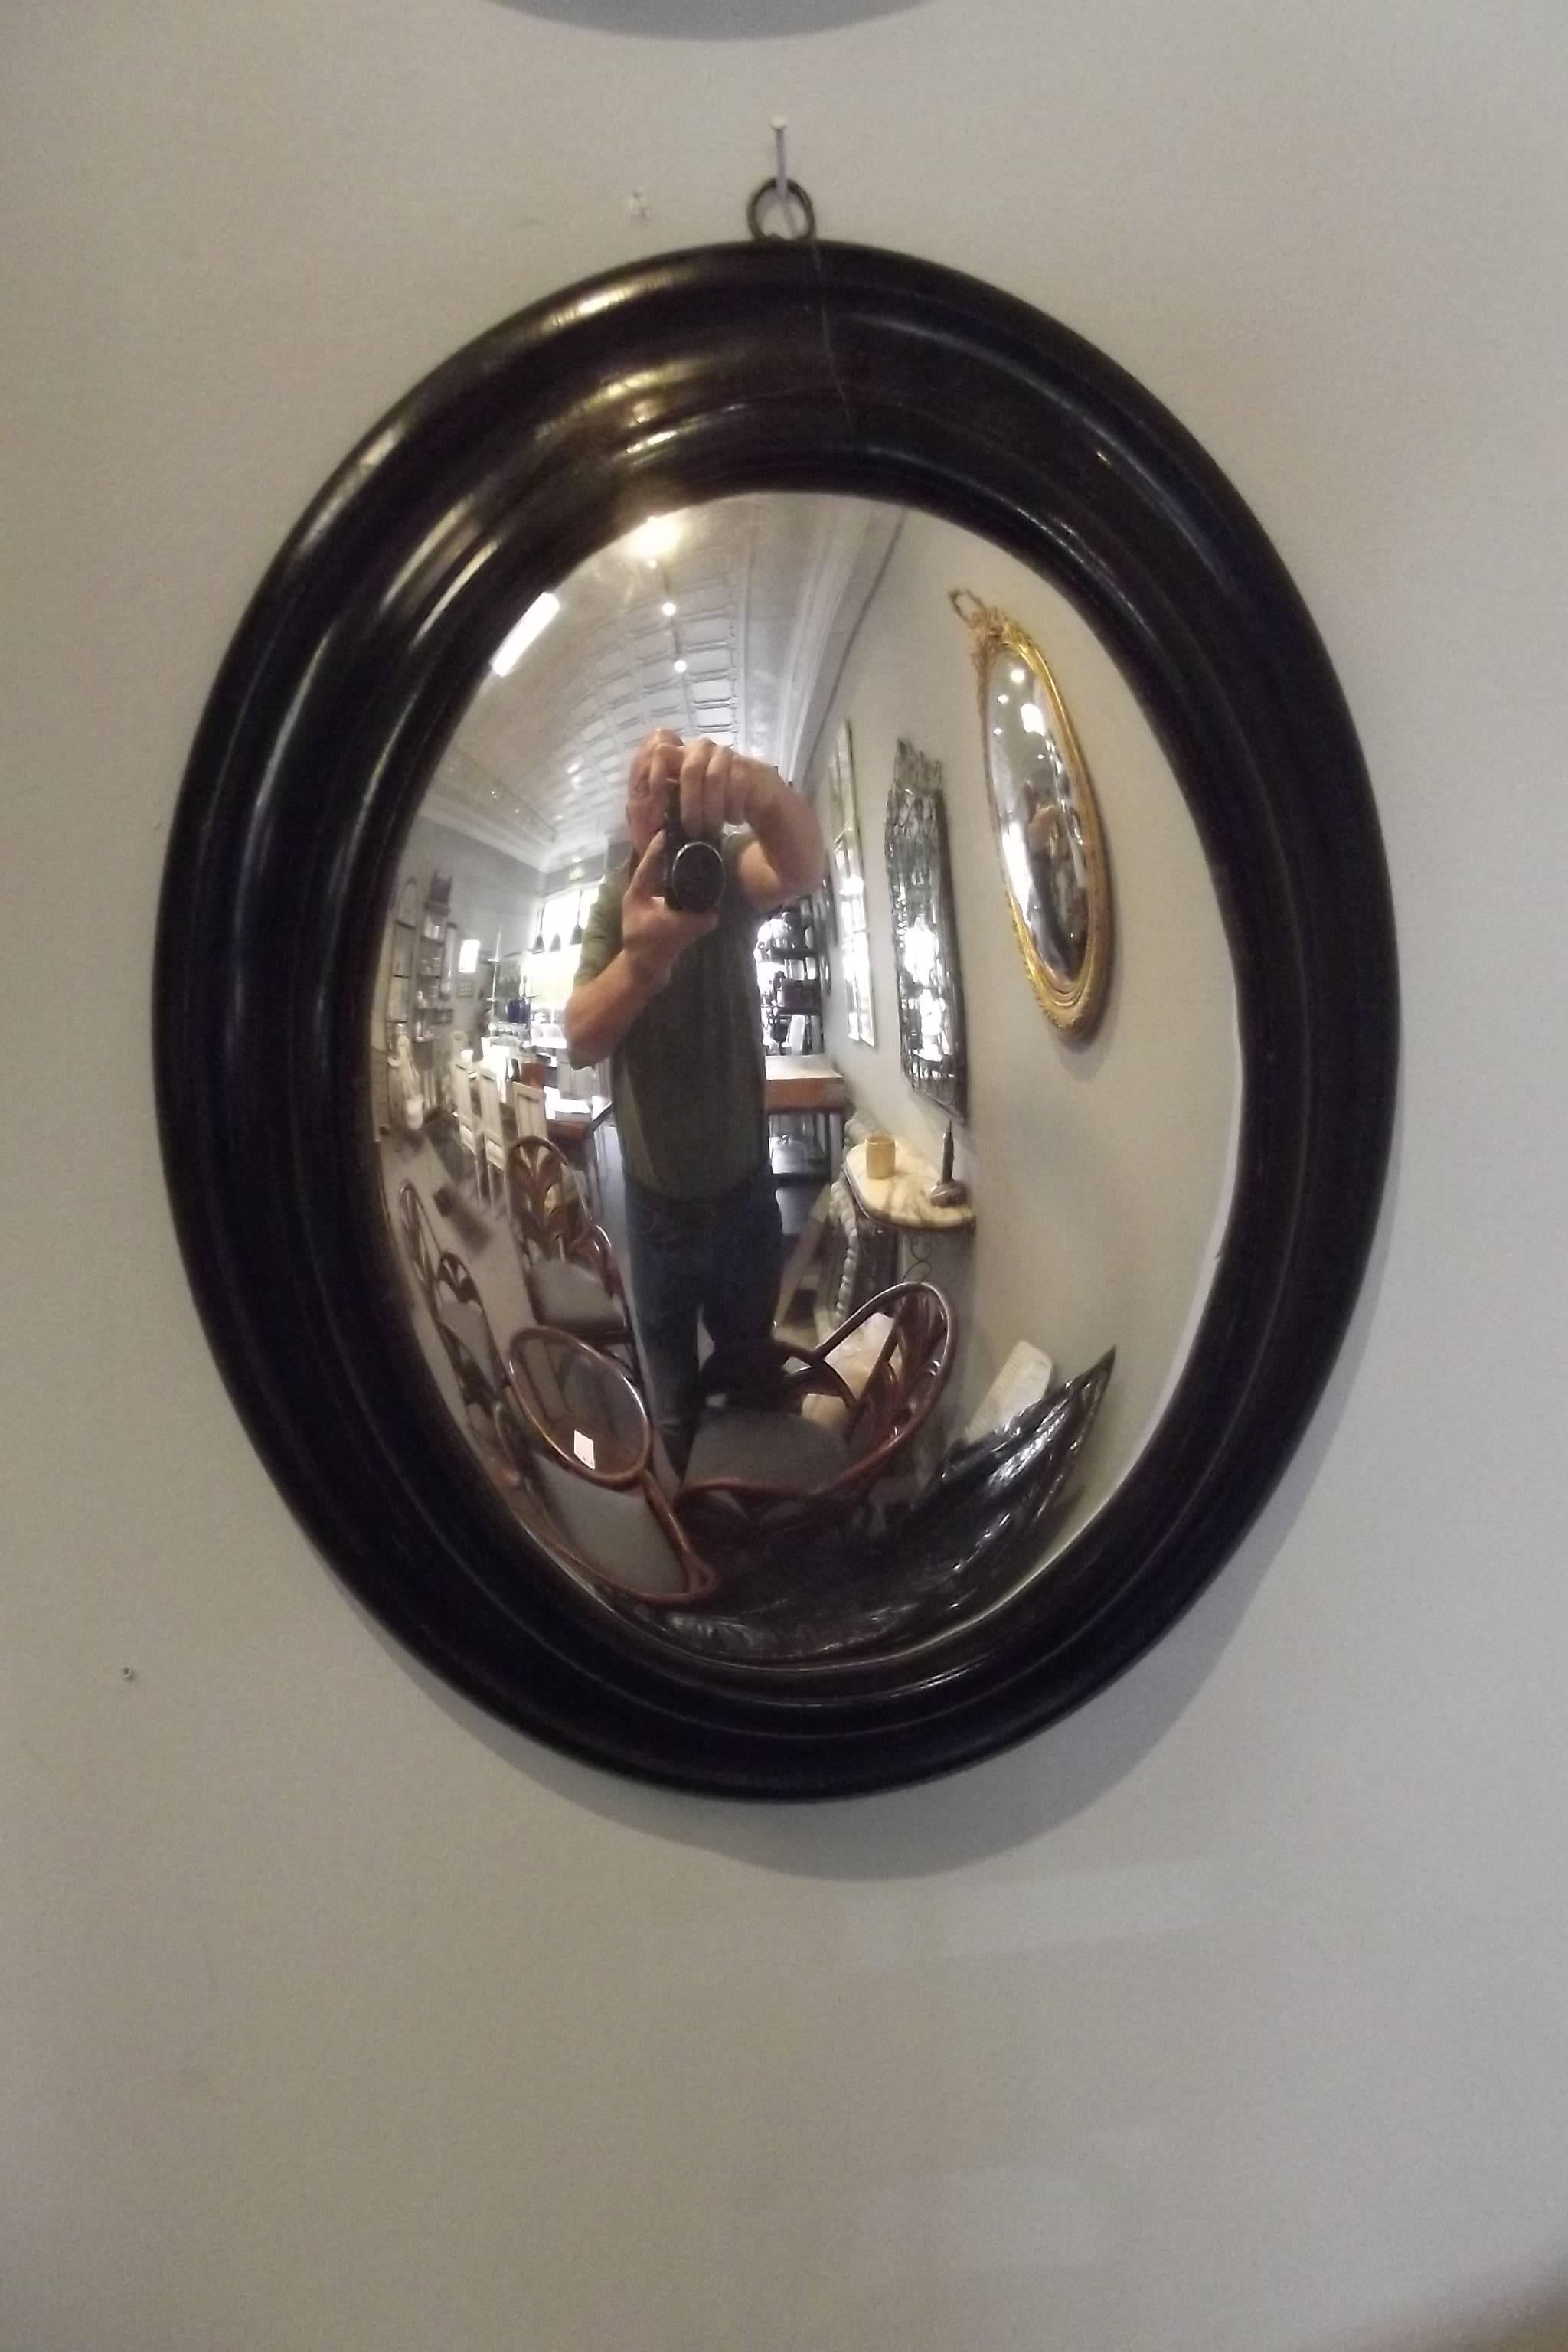 A grouping of four Napoleon III convex mirrors.  Dimensions below are for the upper left mirror, the dimensions of the upper right mirror are 17.5